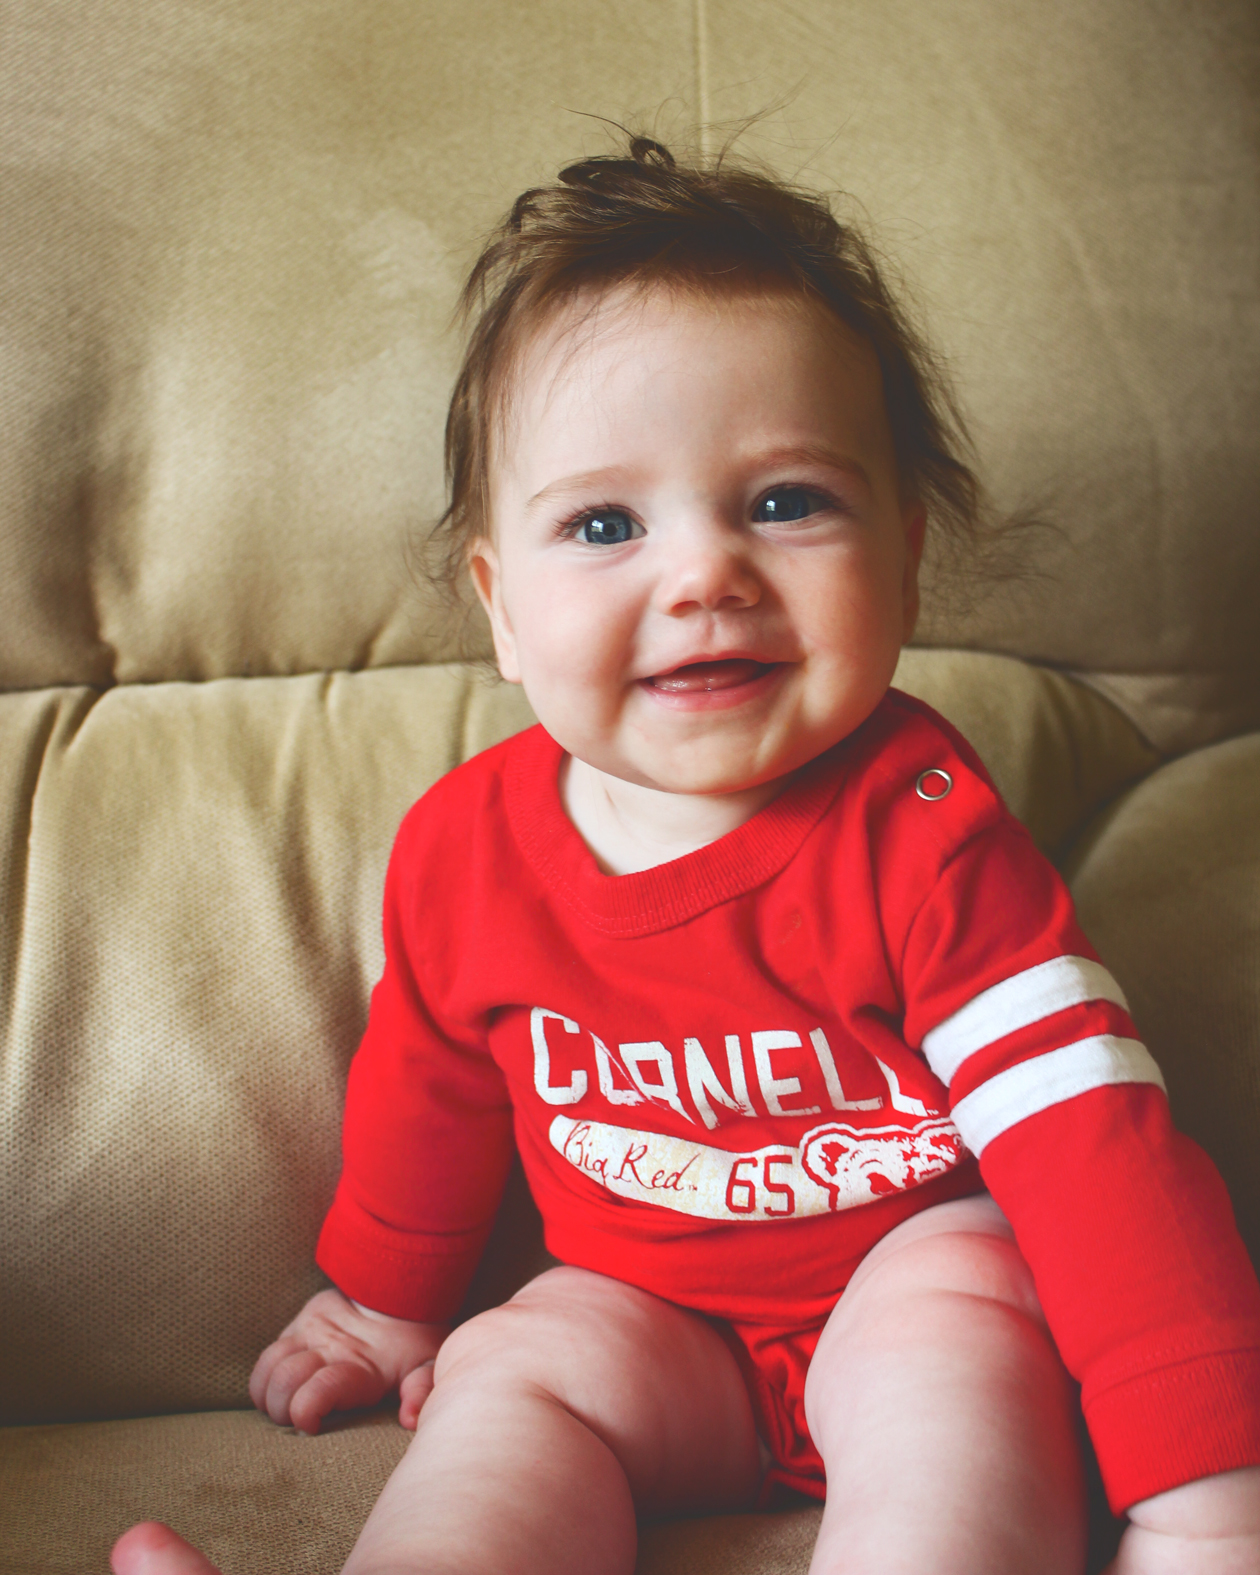 A baby girl wearing a red and white Cornell onesie sitting on a beige couch